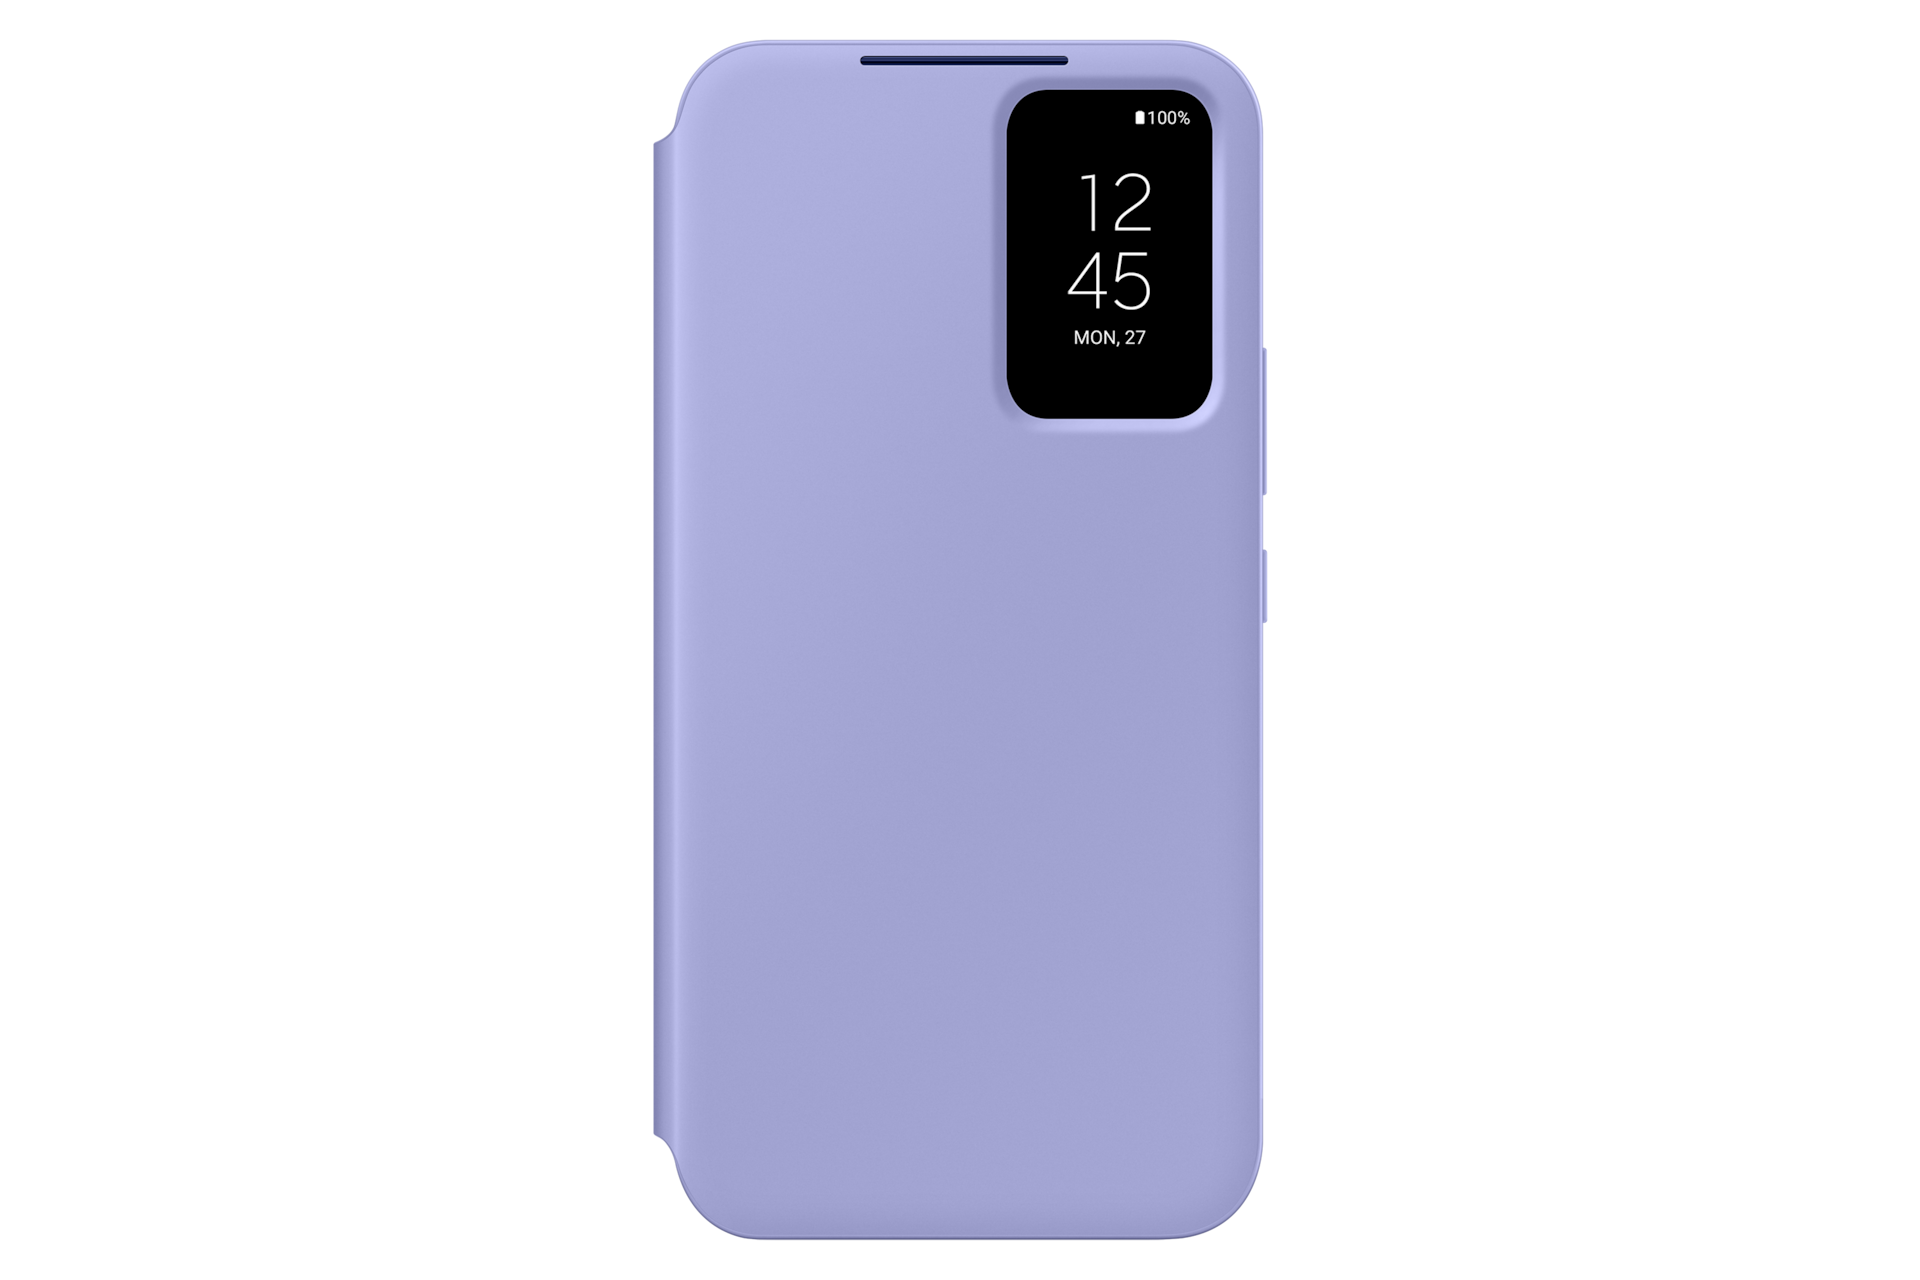 Buy Galaxy A54 5G Smart View Wallet Case Blueberry